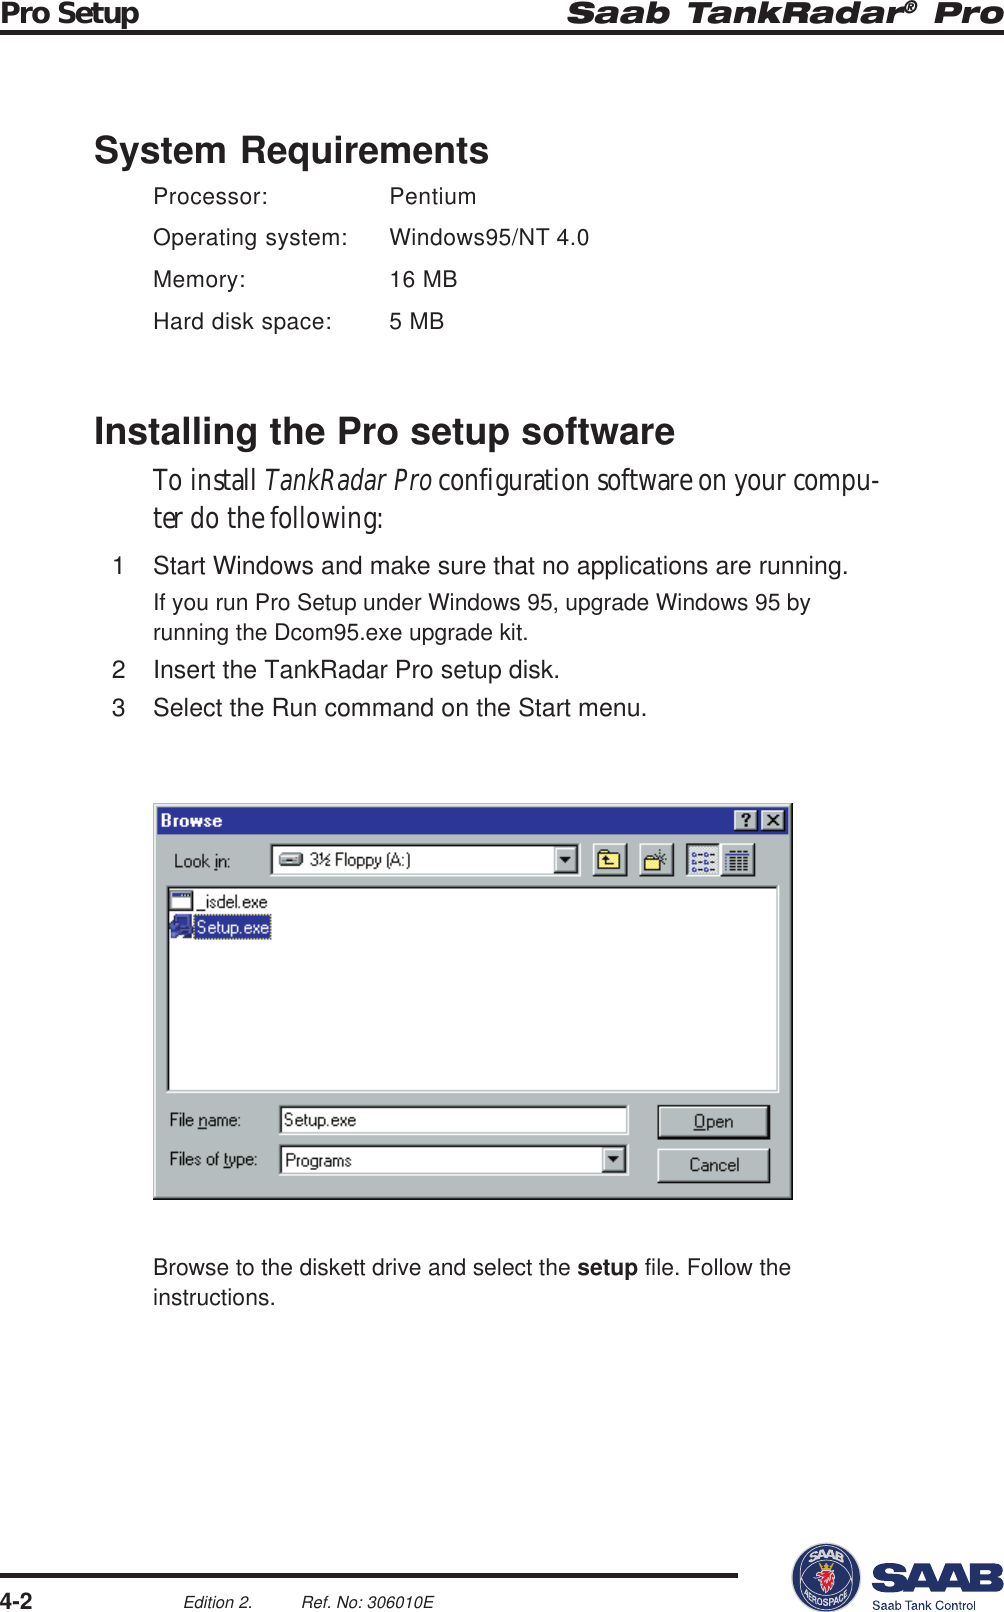 Saab TankRadar® ProPro Setup4-2Edition 2. Ref. No: 306010ESystem RequirementsProcessor: PentiumOperating system: Windows95/NT 4.0Memory: 16 MBHard disk space: 5 MBInstalling the Pro setup softwareTo install TankRadar Pro configuration software on your compu-ter do the following:1 Start Windows and make sure that no applications are running.If you run Pro Setup under Windows 95, upgrade Windows 95 byrunning the Dcom95.exe upgrade kit.2 Insert the TankRadar Pro setup disk.3 Select the Run command on the Start menu.Browse to the diskett drive and select the setup file. Follow theinstructions.